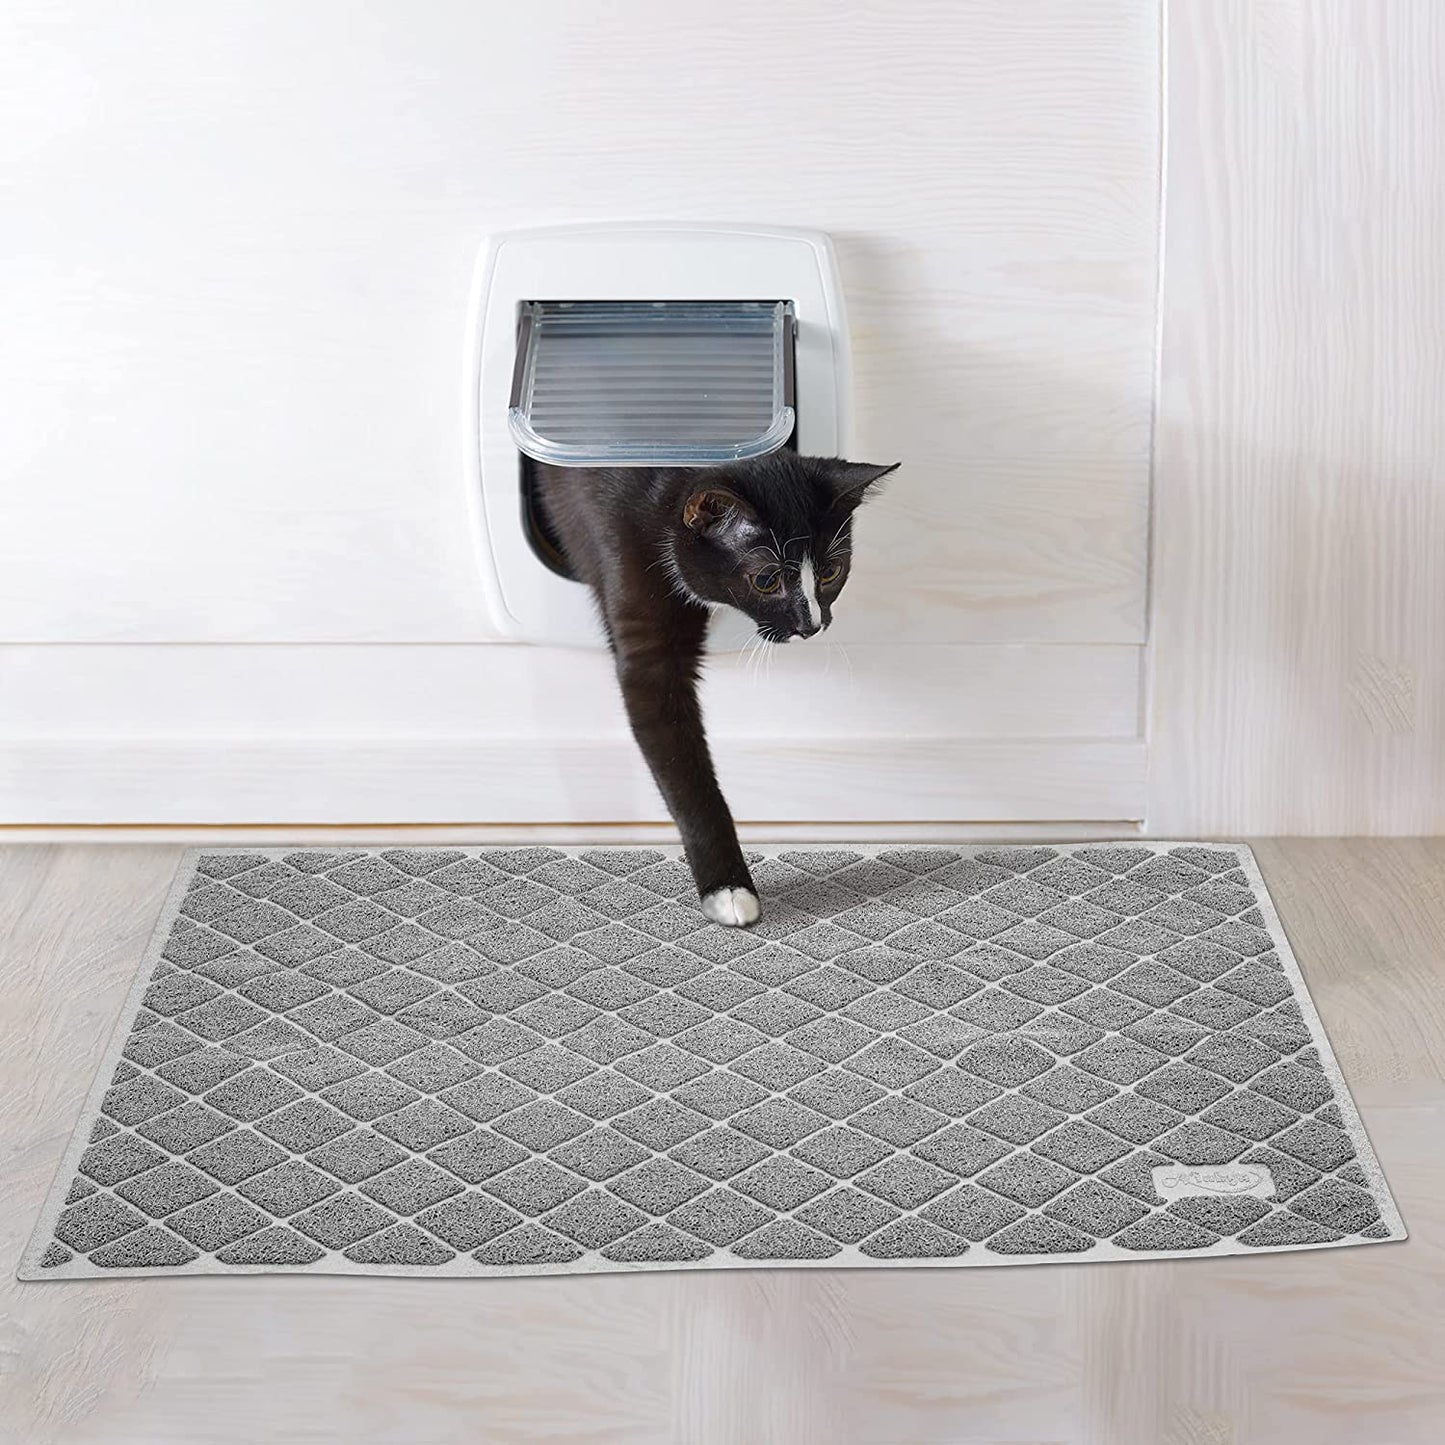 Premium Cat Litter Mat, Litter Box Mat with Non-Slip and Waterproof Backing, Litter Trapping Mat Soft on Kitty Paws and Easy to Clean, Cat Mat Traps Litter from Box